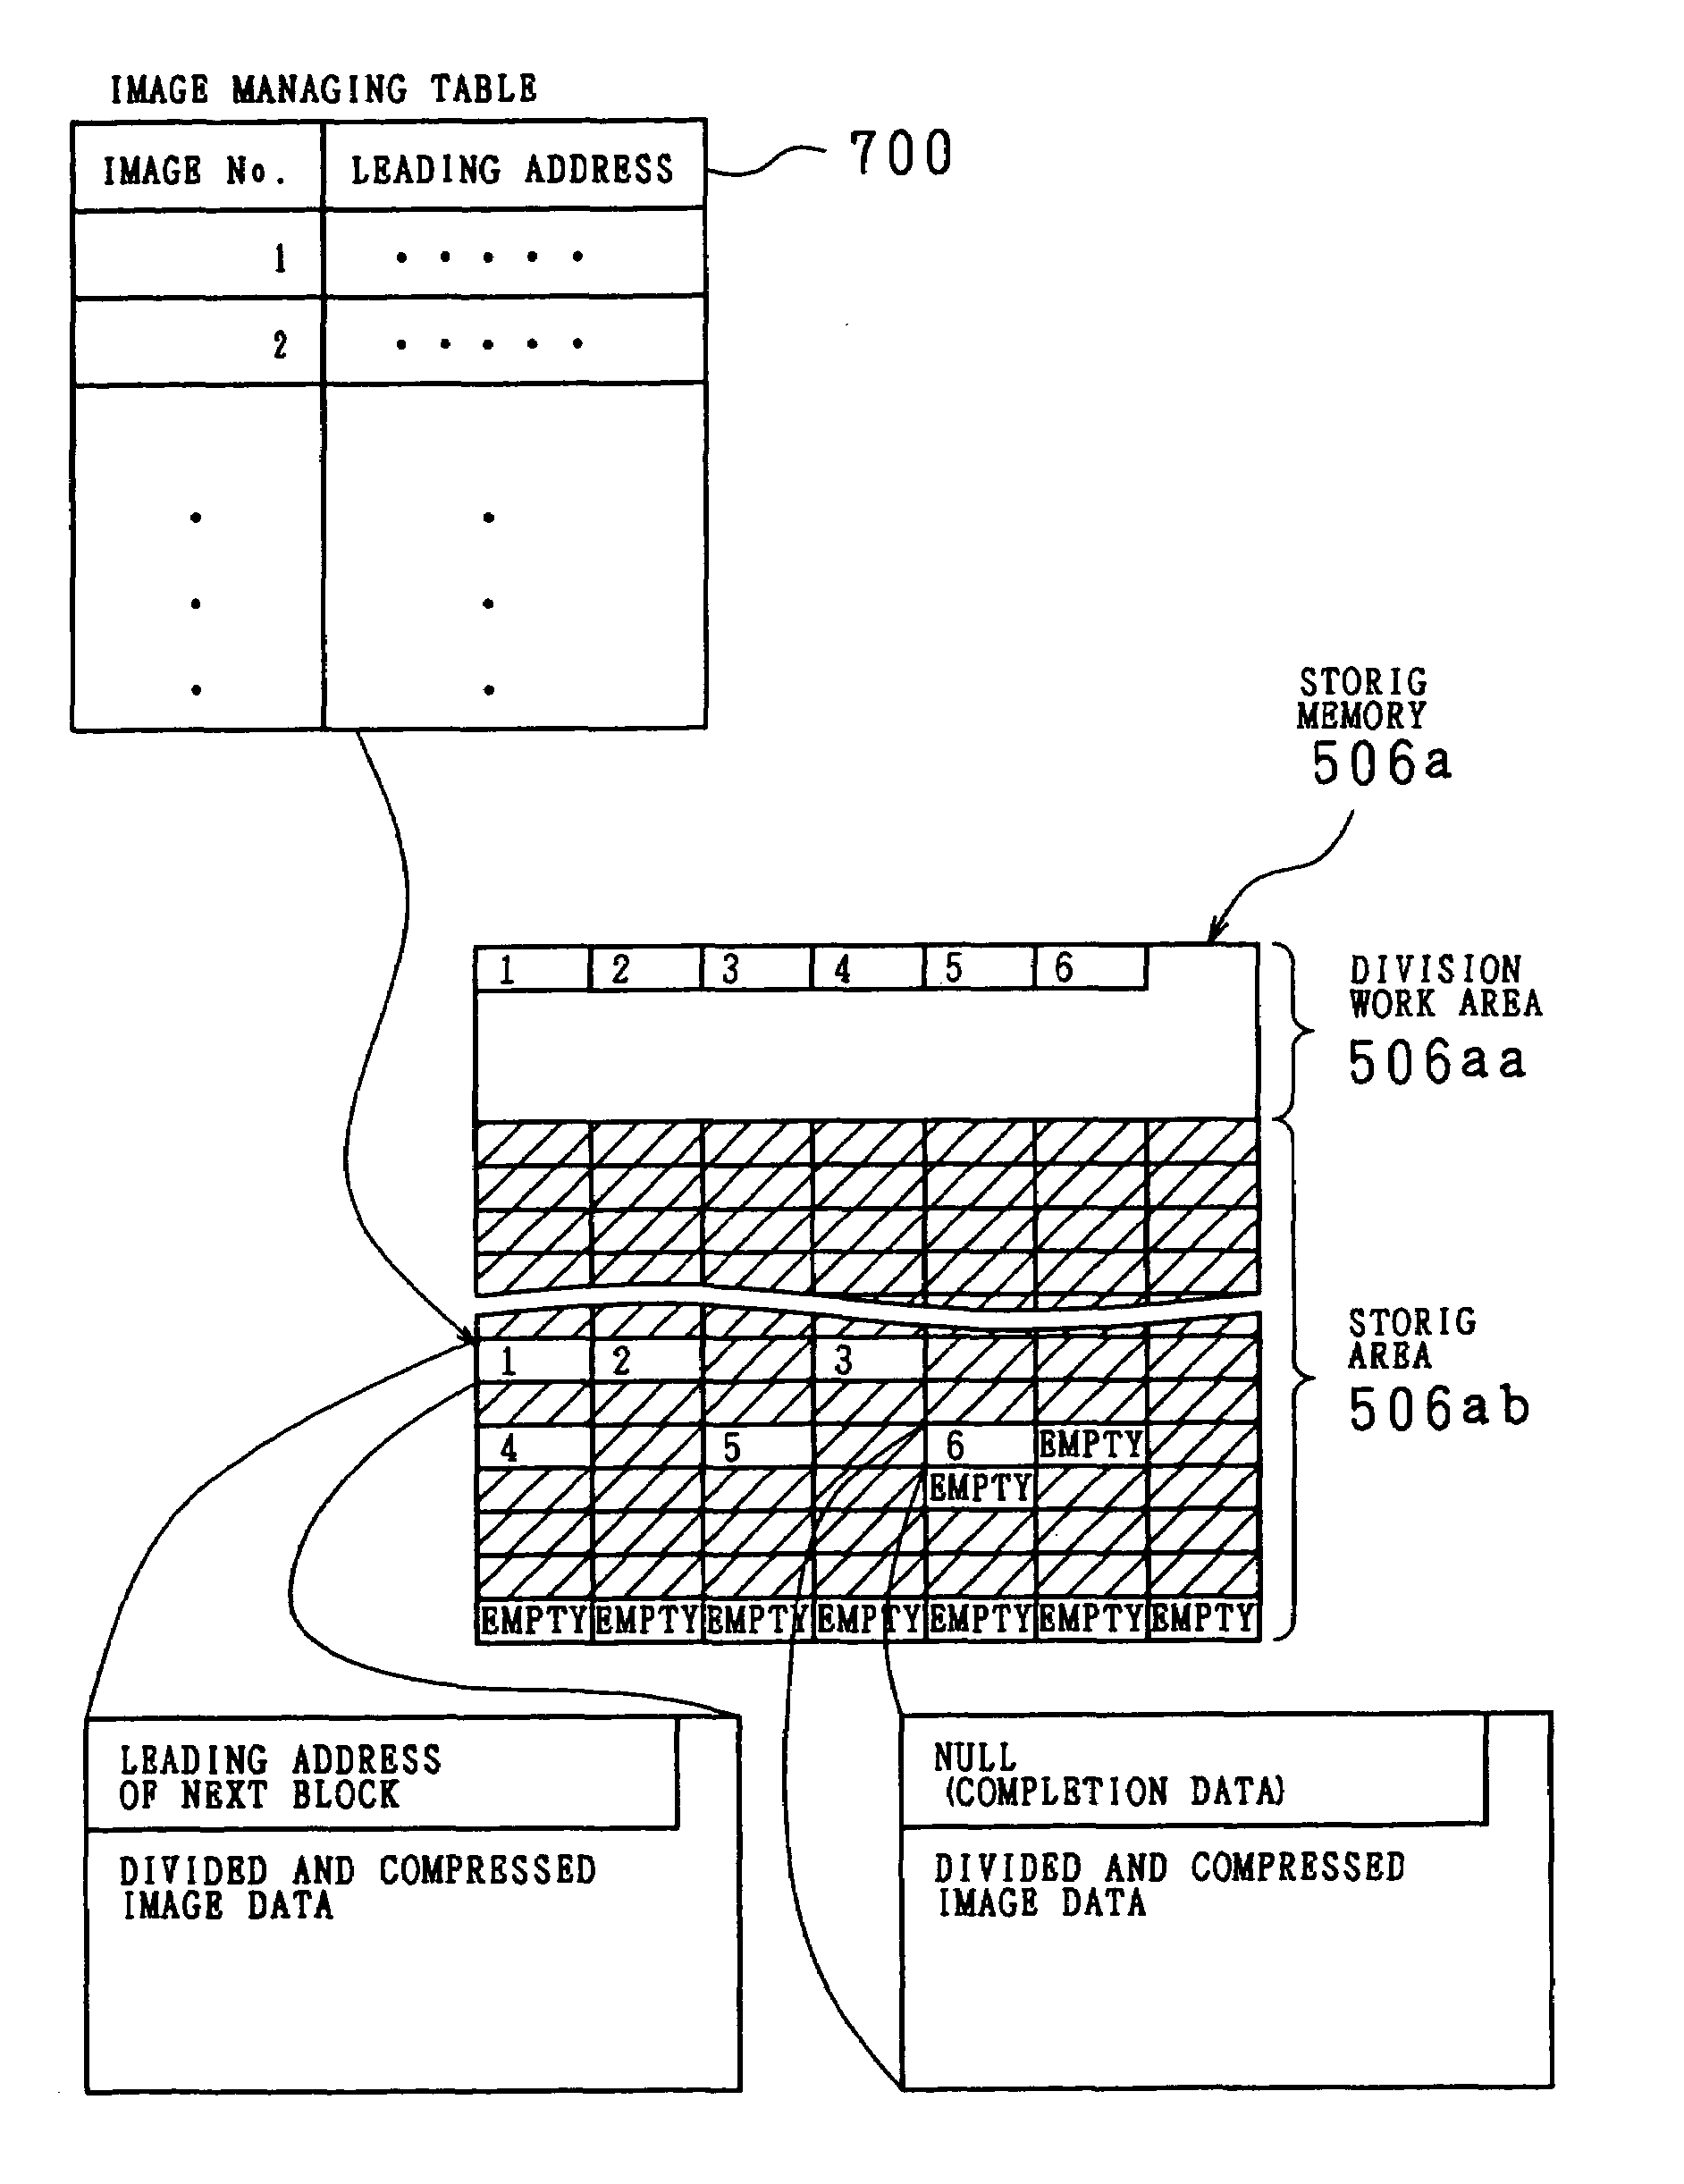 Image processing apparatus that compresses and divides image data for storage